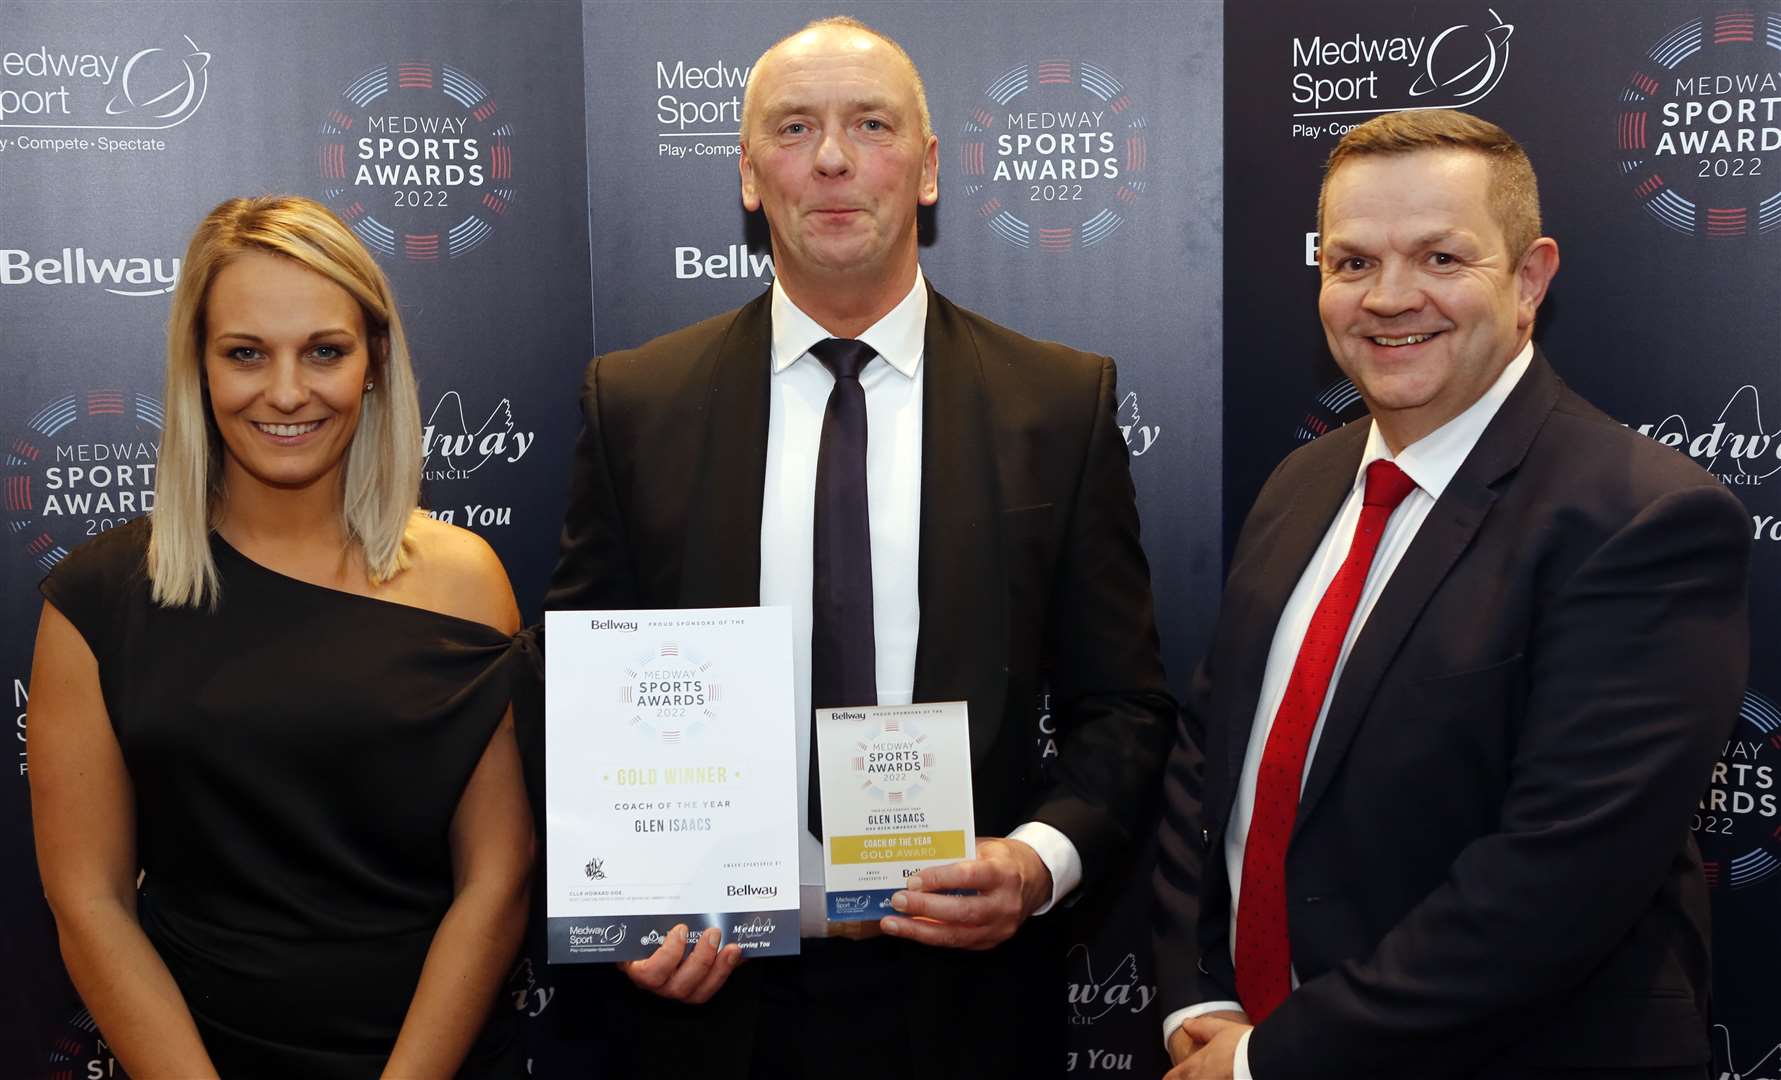 Coach of the Year sponsored by Bellway: Glen Isaacs. Picture: Nick Johnson / Medway Council